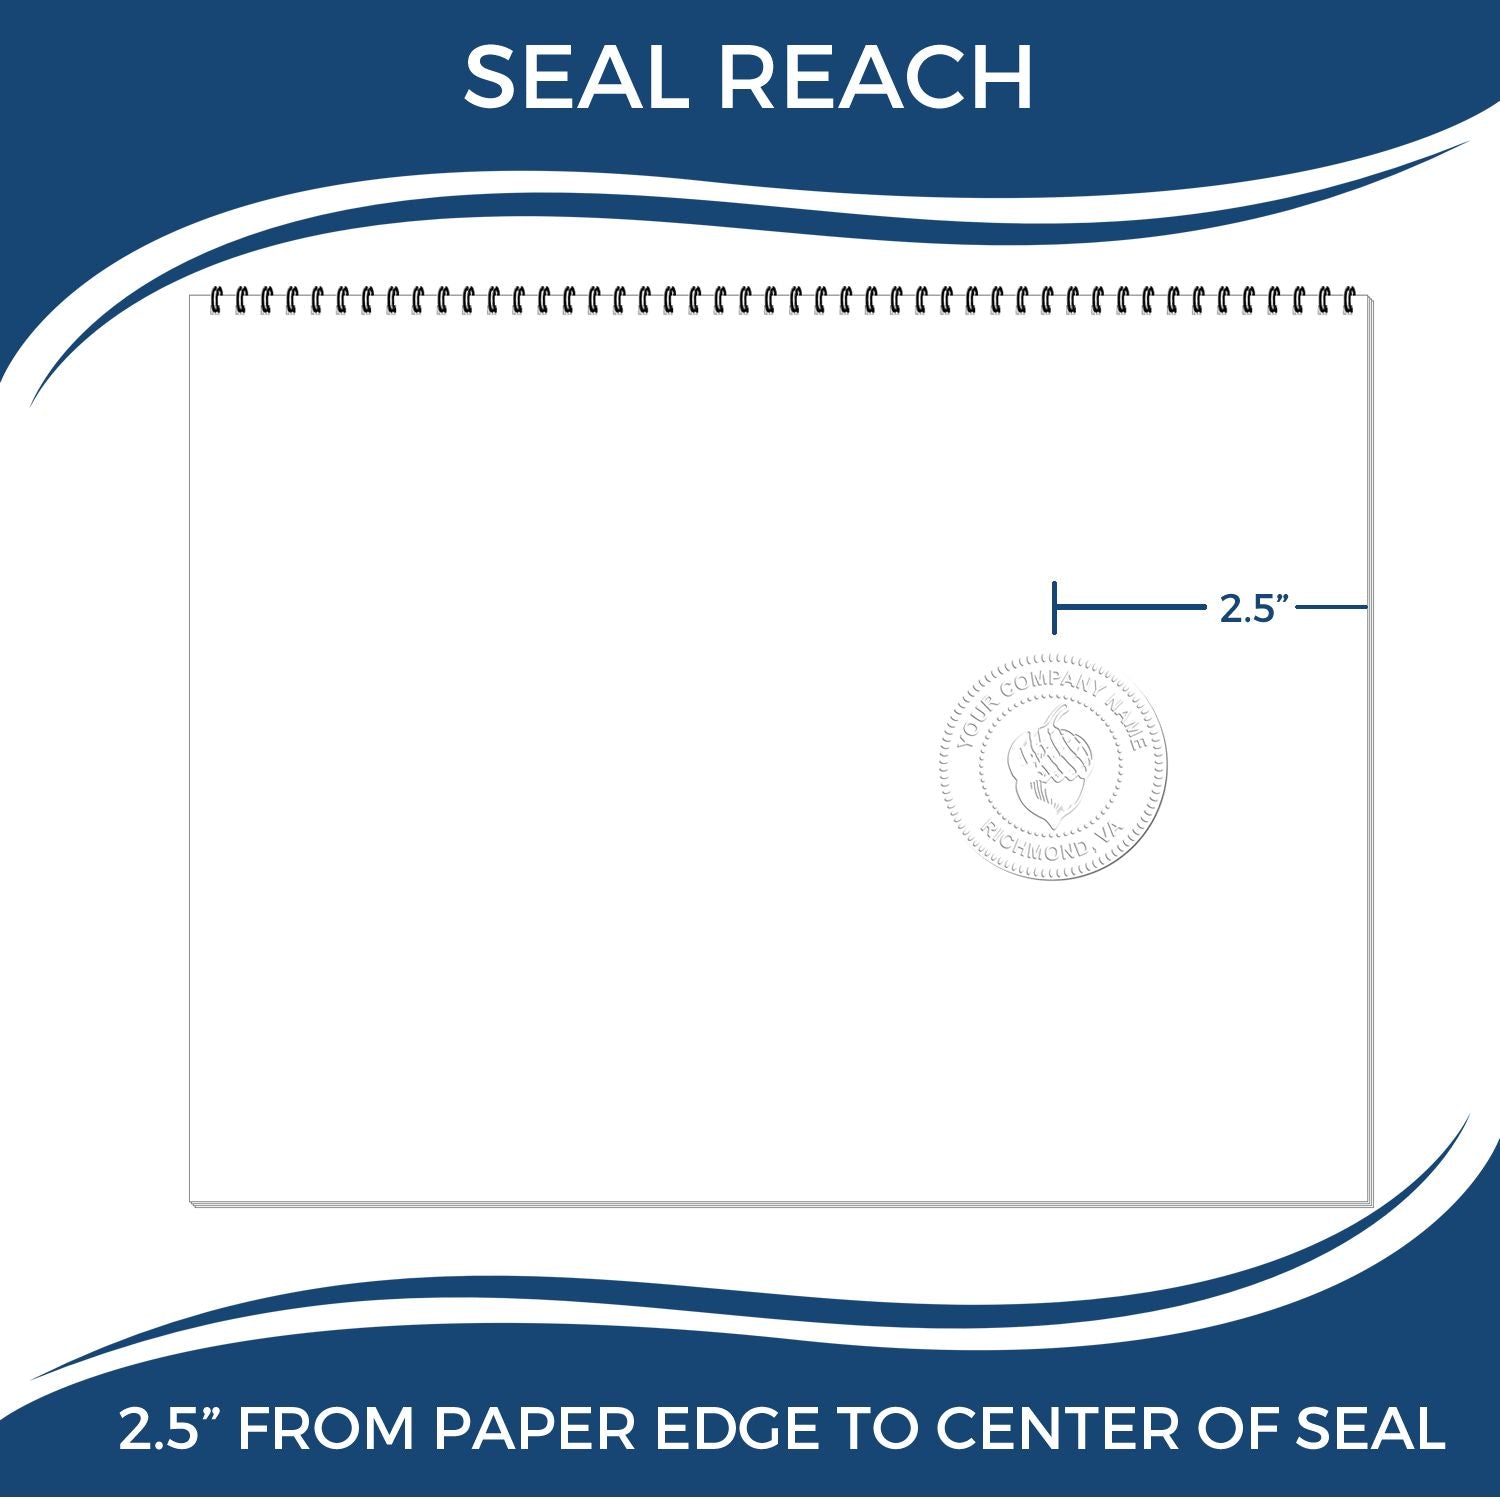 An infographic showing the seal reach which is represented by a ruler and a miniature seal image of the Long Reach Missouri Land Surveyor Seal